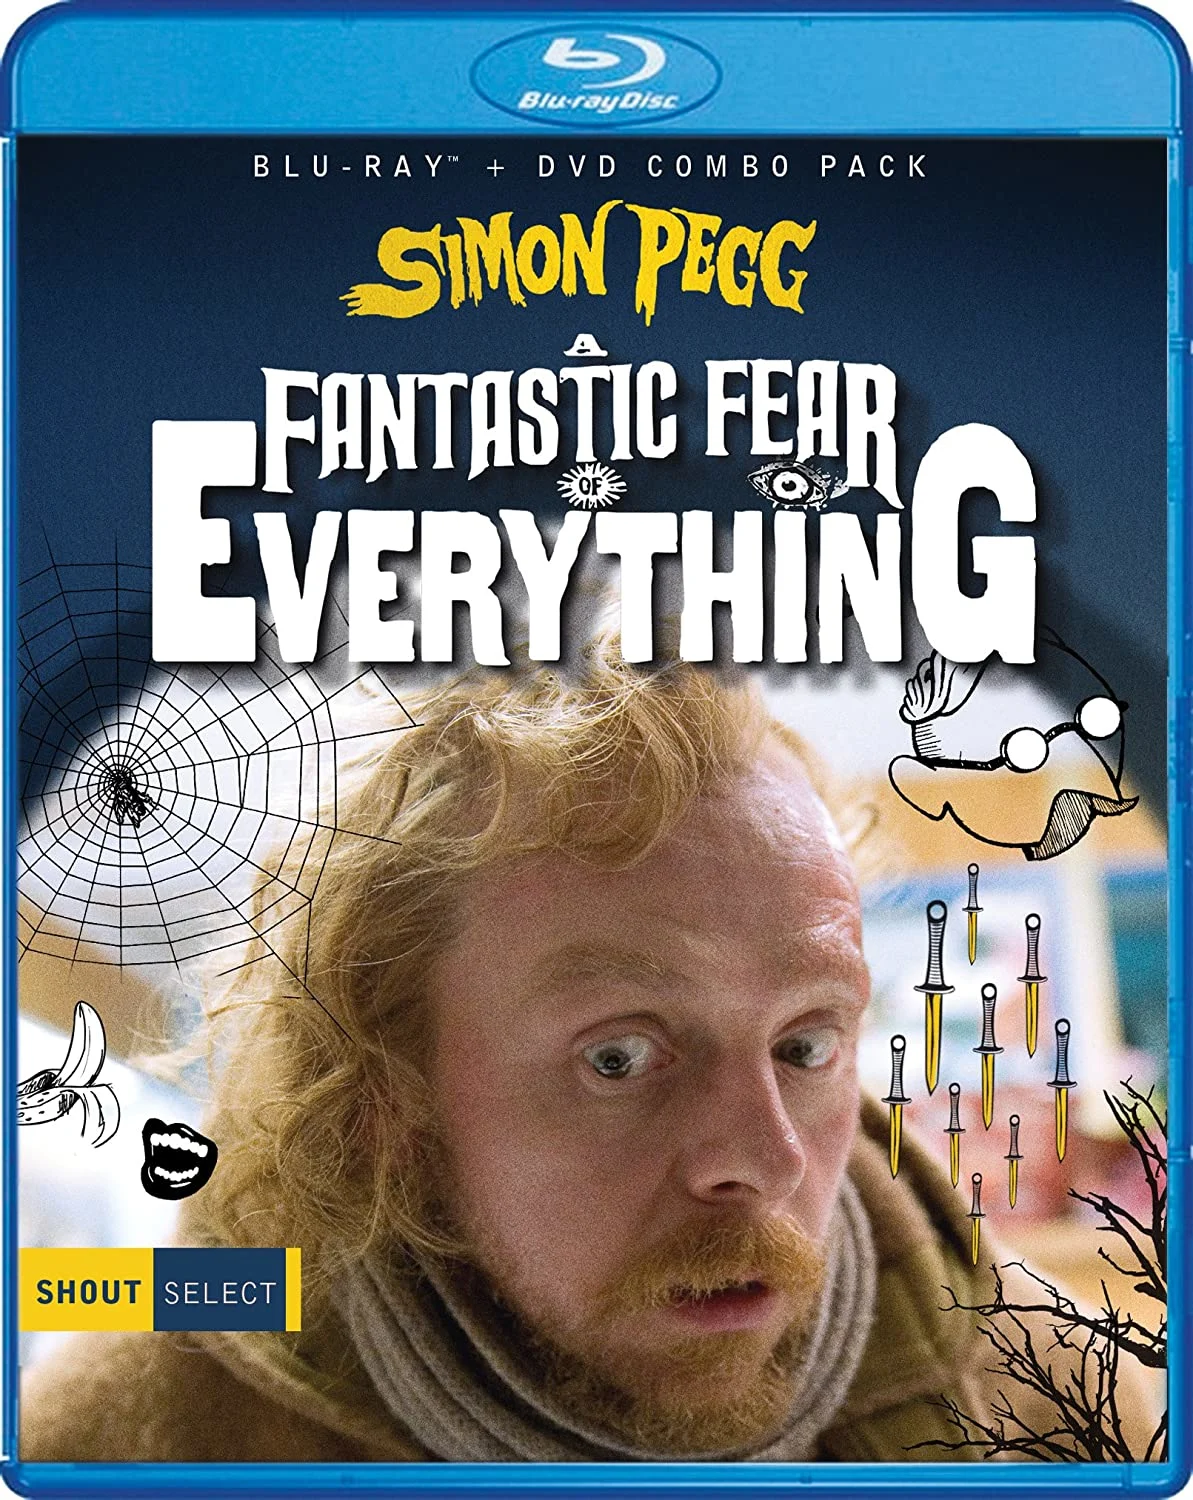 Fantastic Fear of Everything, A (Blu-ray/DVD Combo) on MovieShack